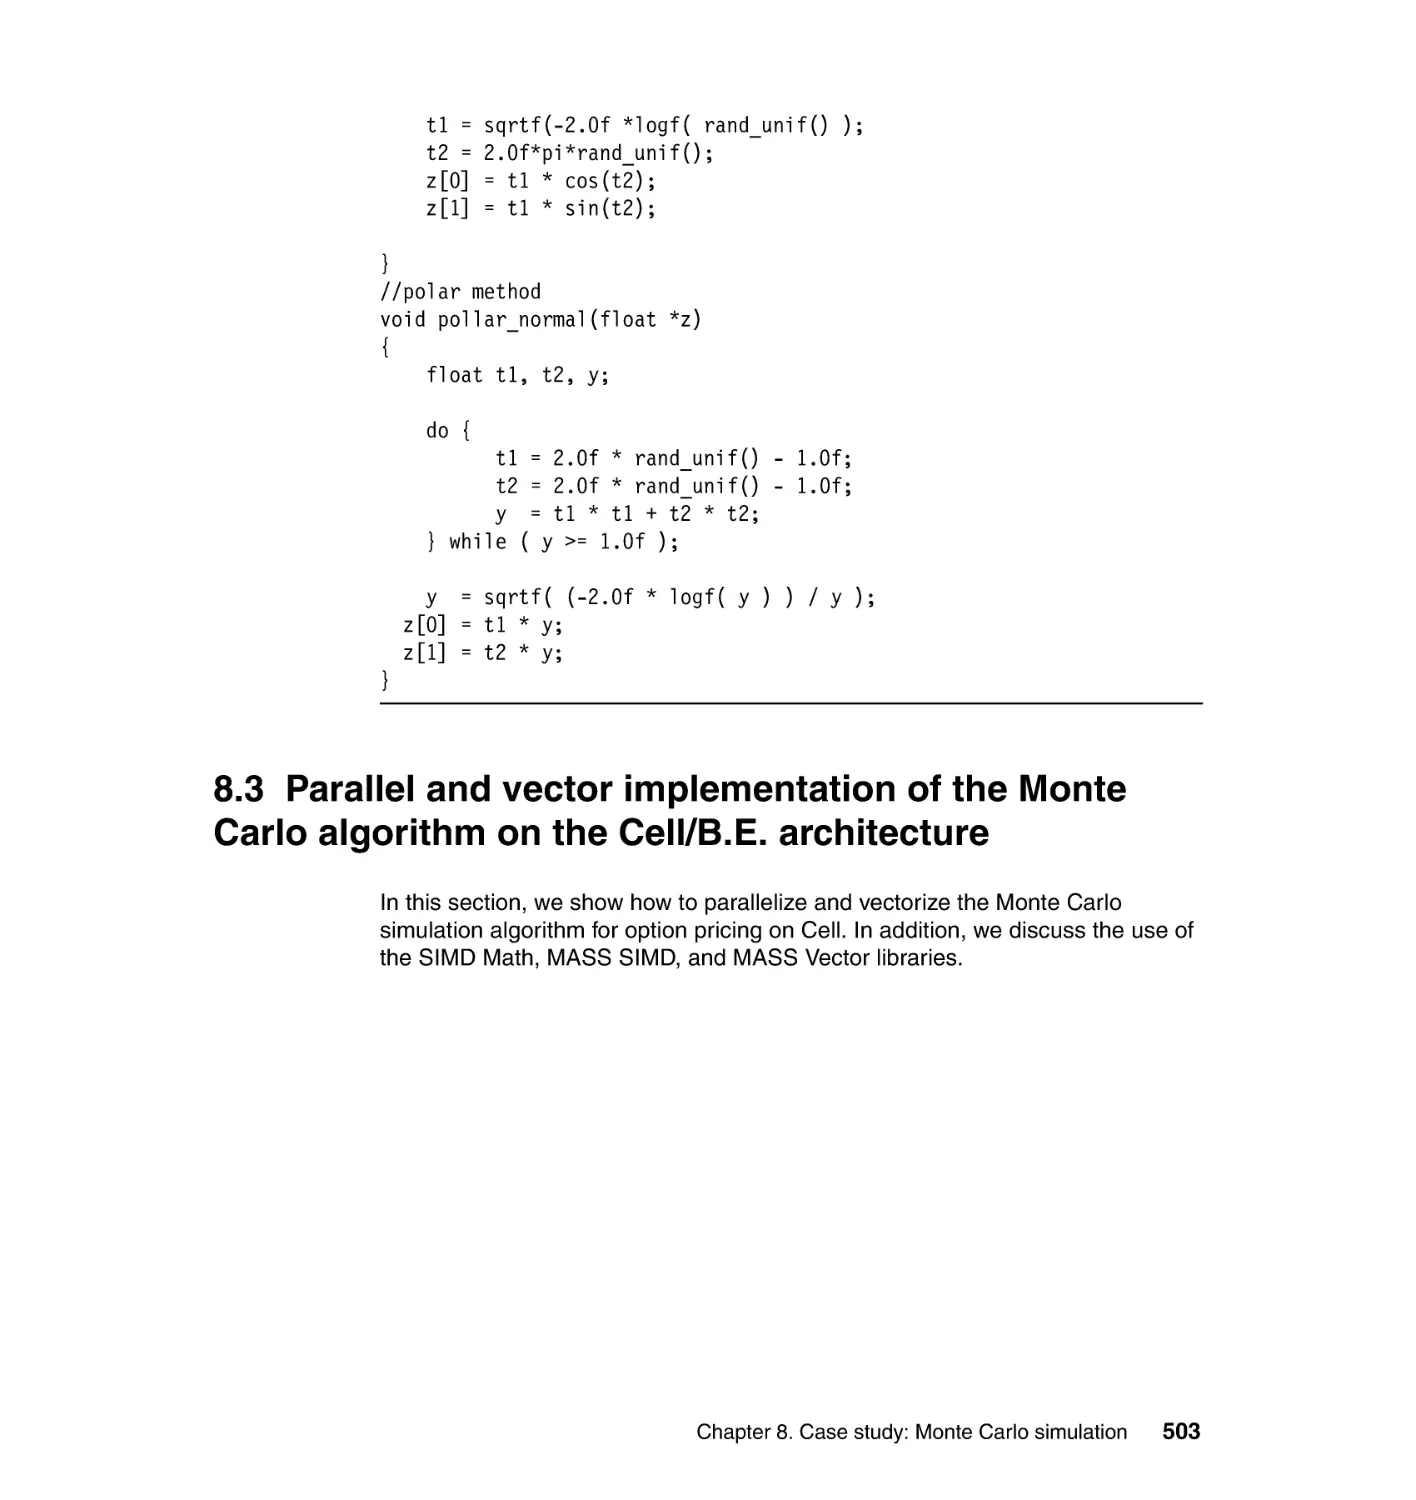 8.3 Parallel and vector implementation of the Monte Carlo algorithm on the Cell/B.E. architecture